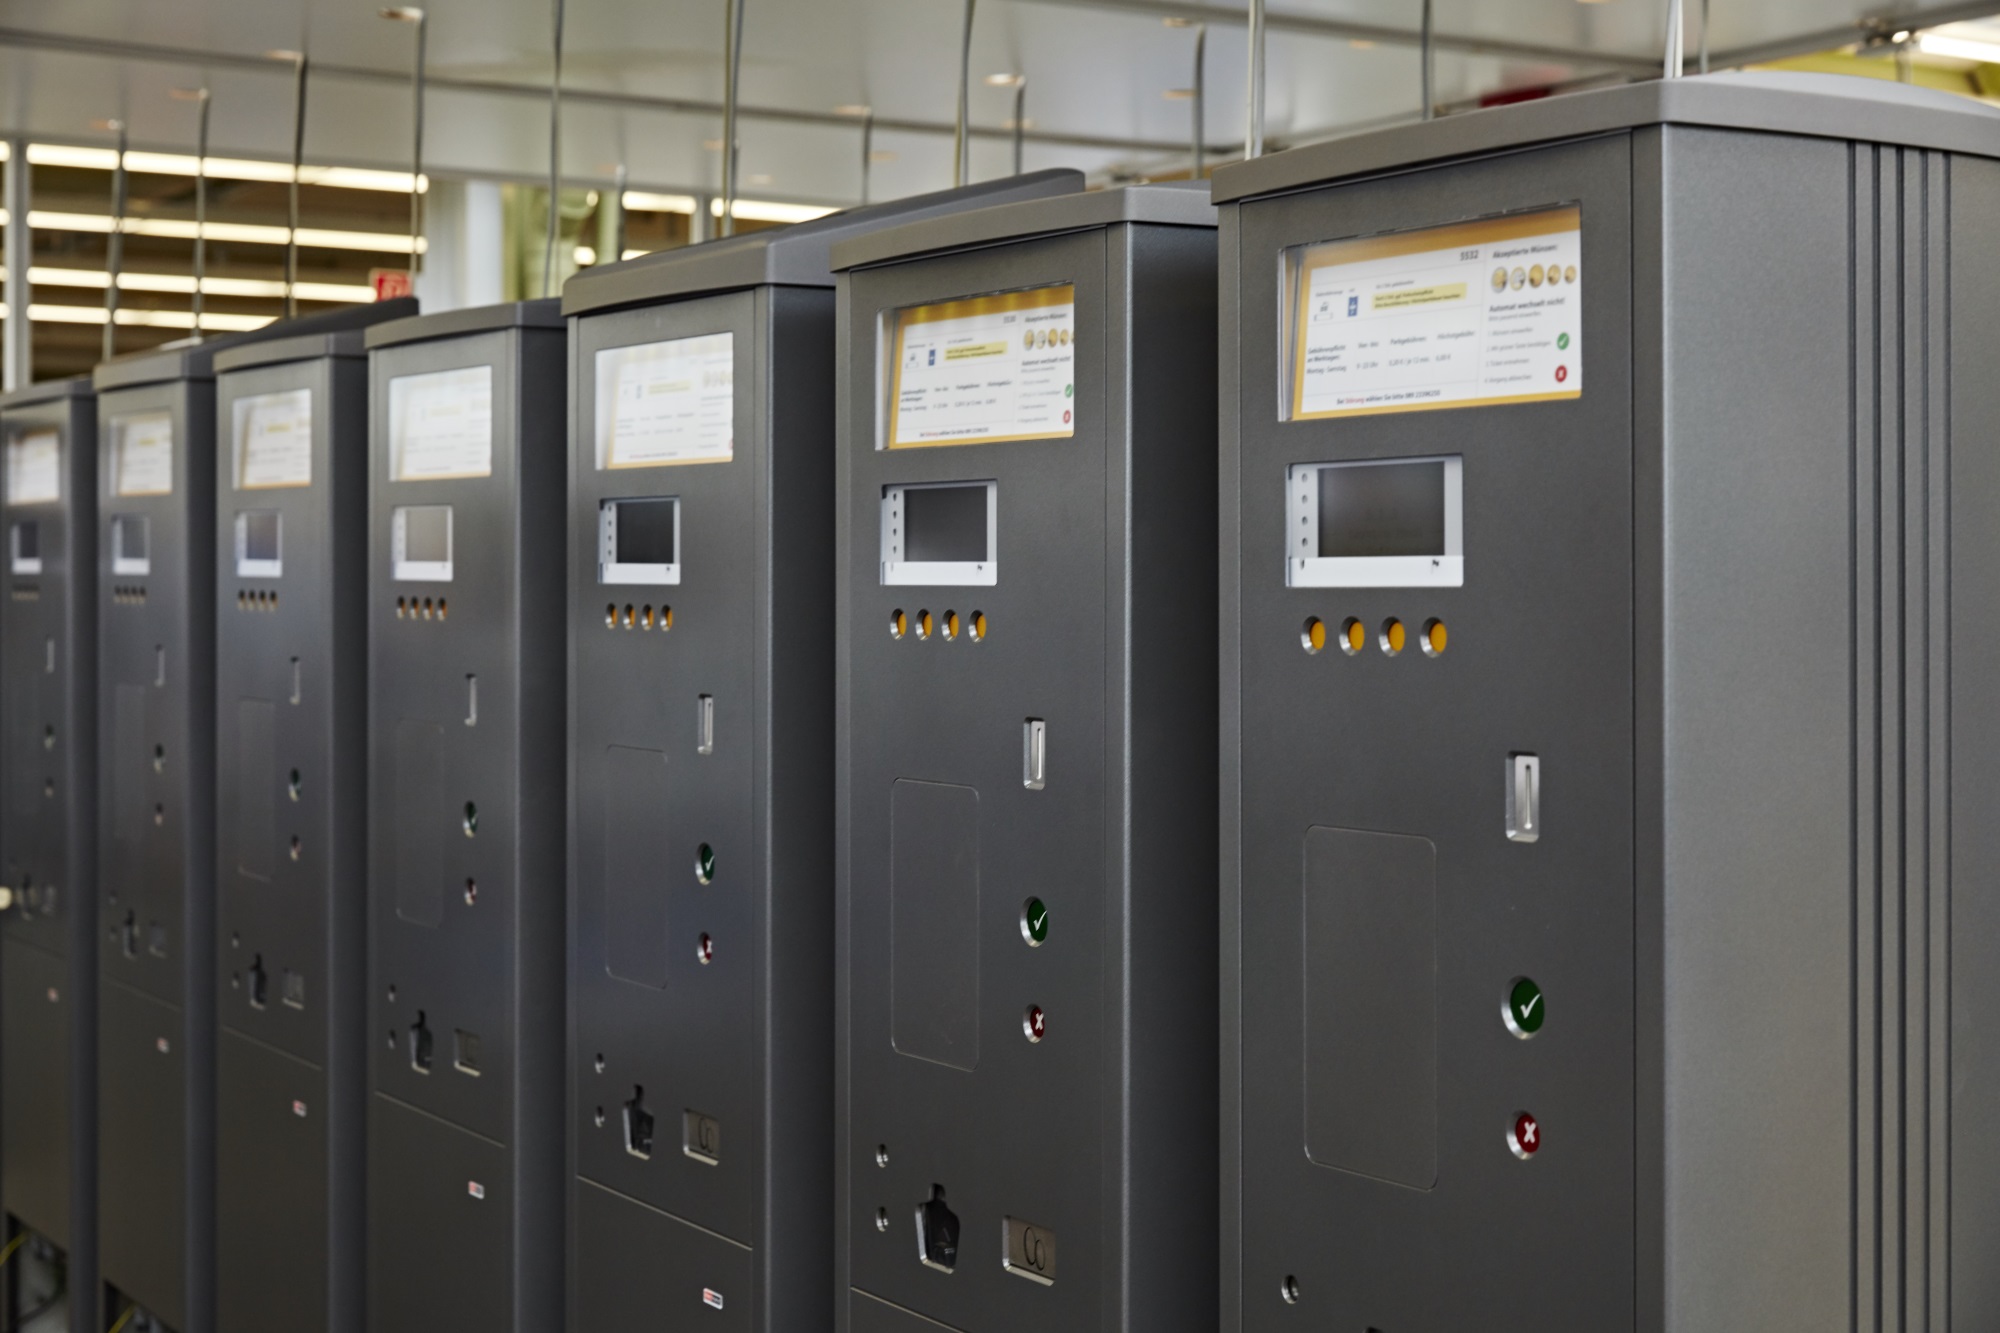 Citea parking ticket machines ready for use in Munich